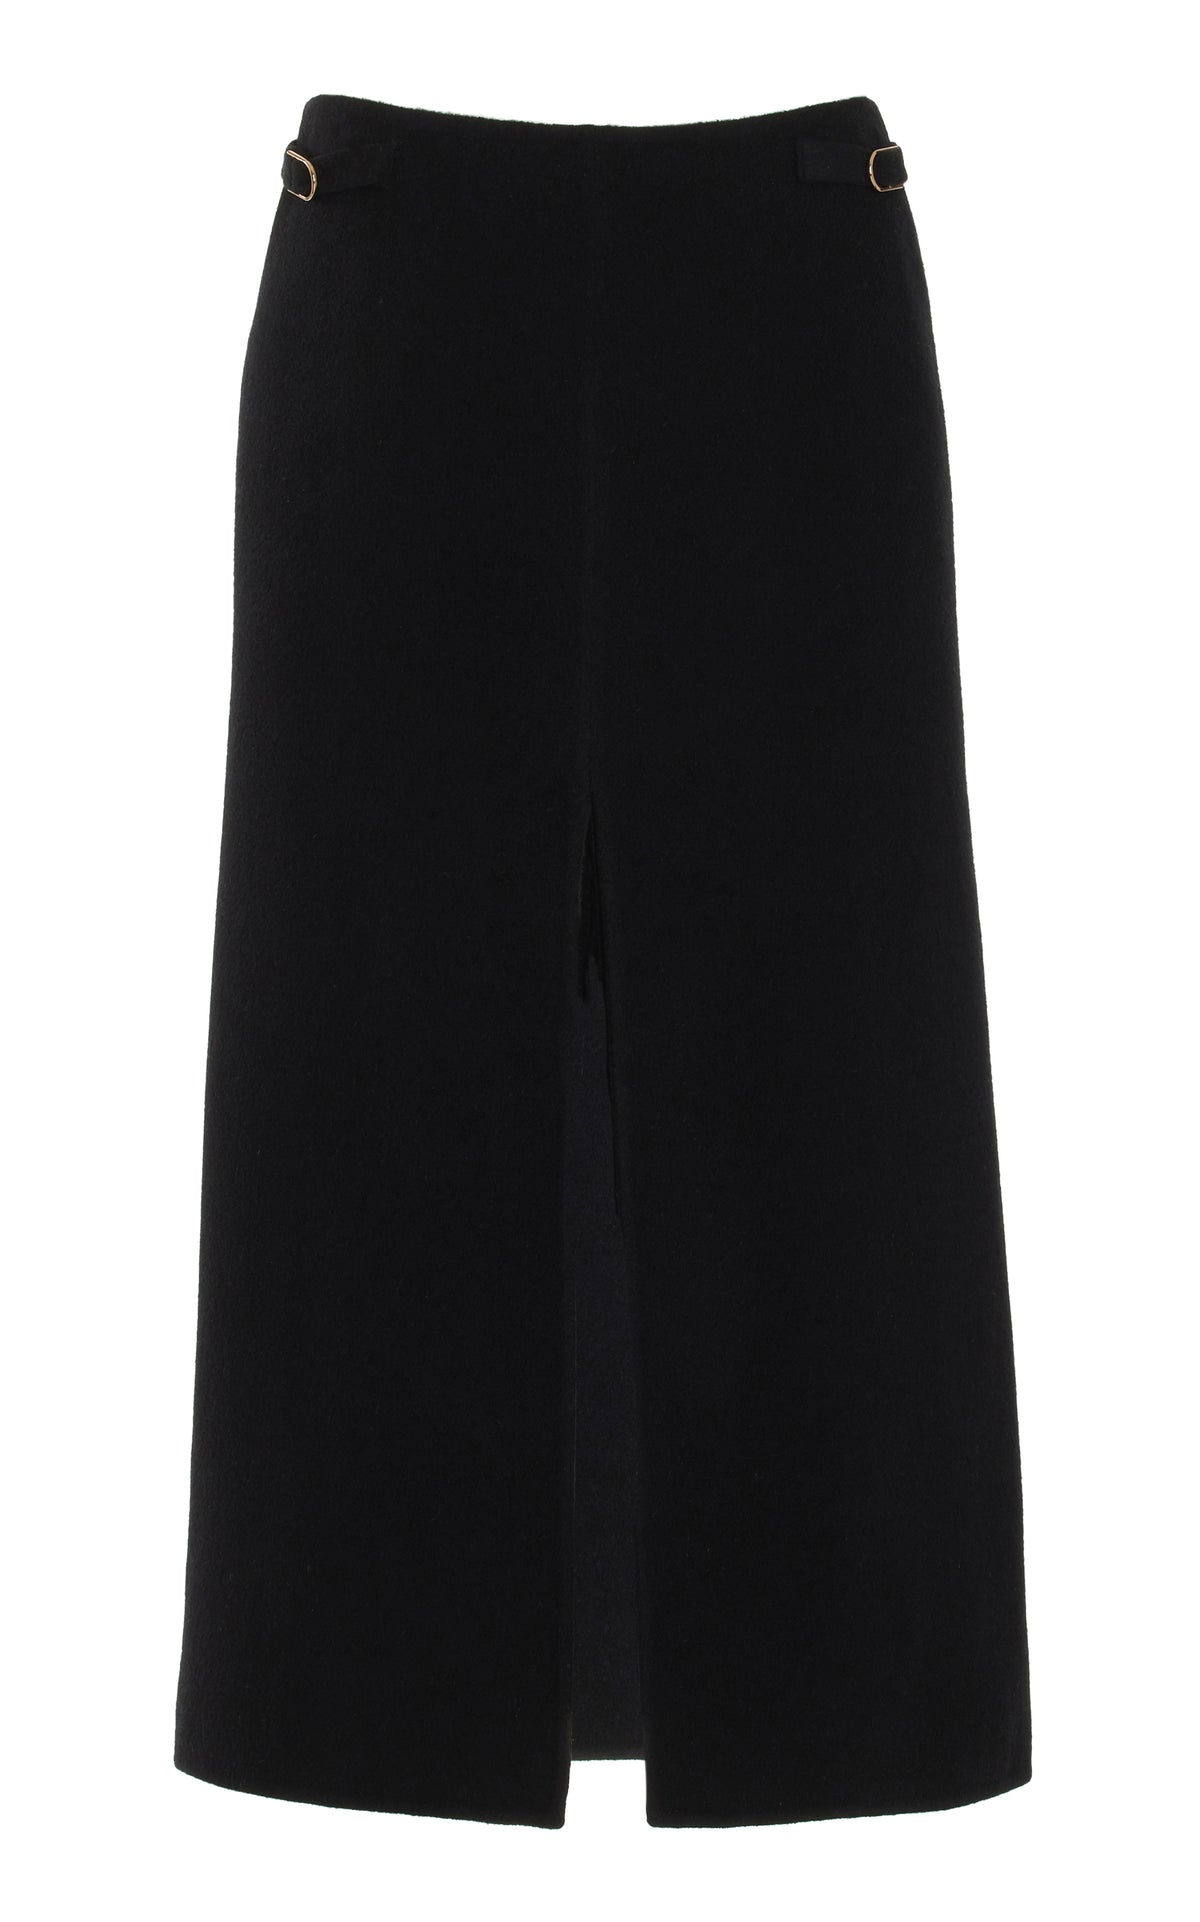 Morelos Skirt in Black Double-Face Recycled Cashmere